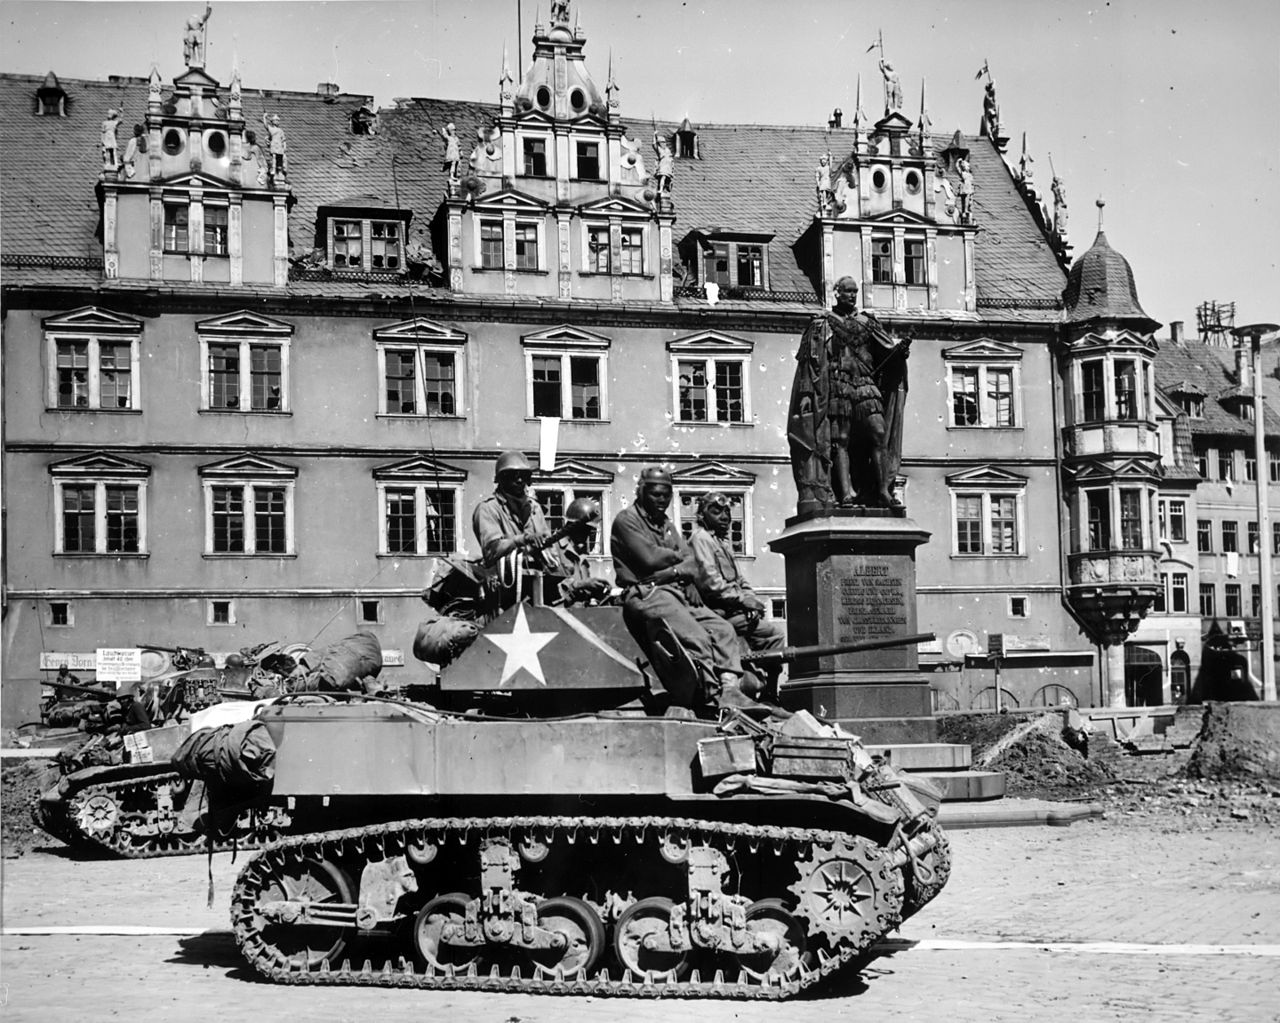 Crews of U.S. M5 Stuart light tanks from Company D, 761st Tank Battalion, stand by awaiting call to clean out scattered Nazi machine gun nests in Coburg, Germany. (Wikimedia Commons)